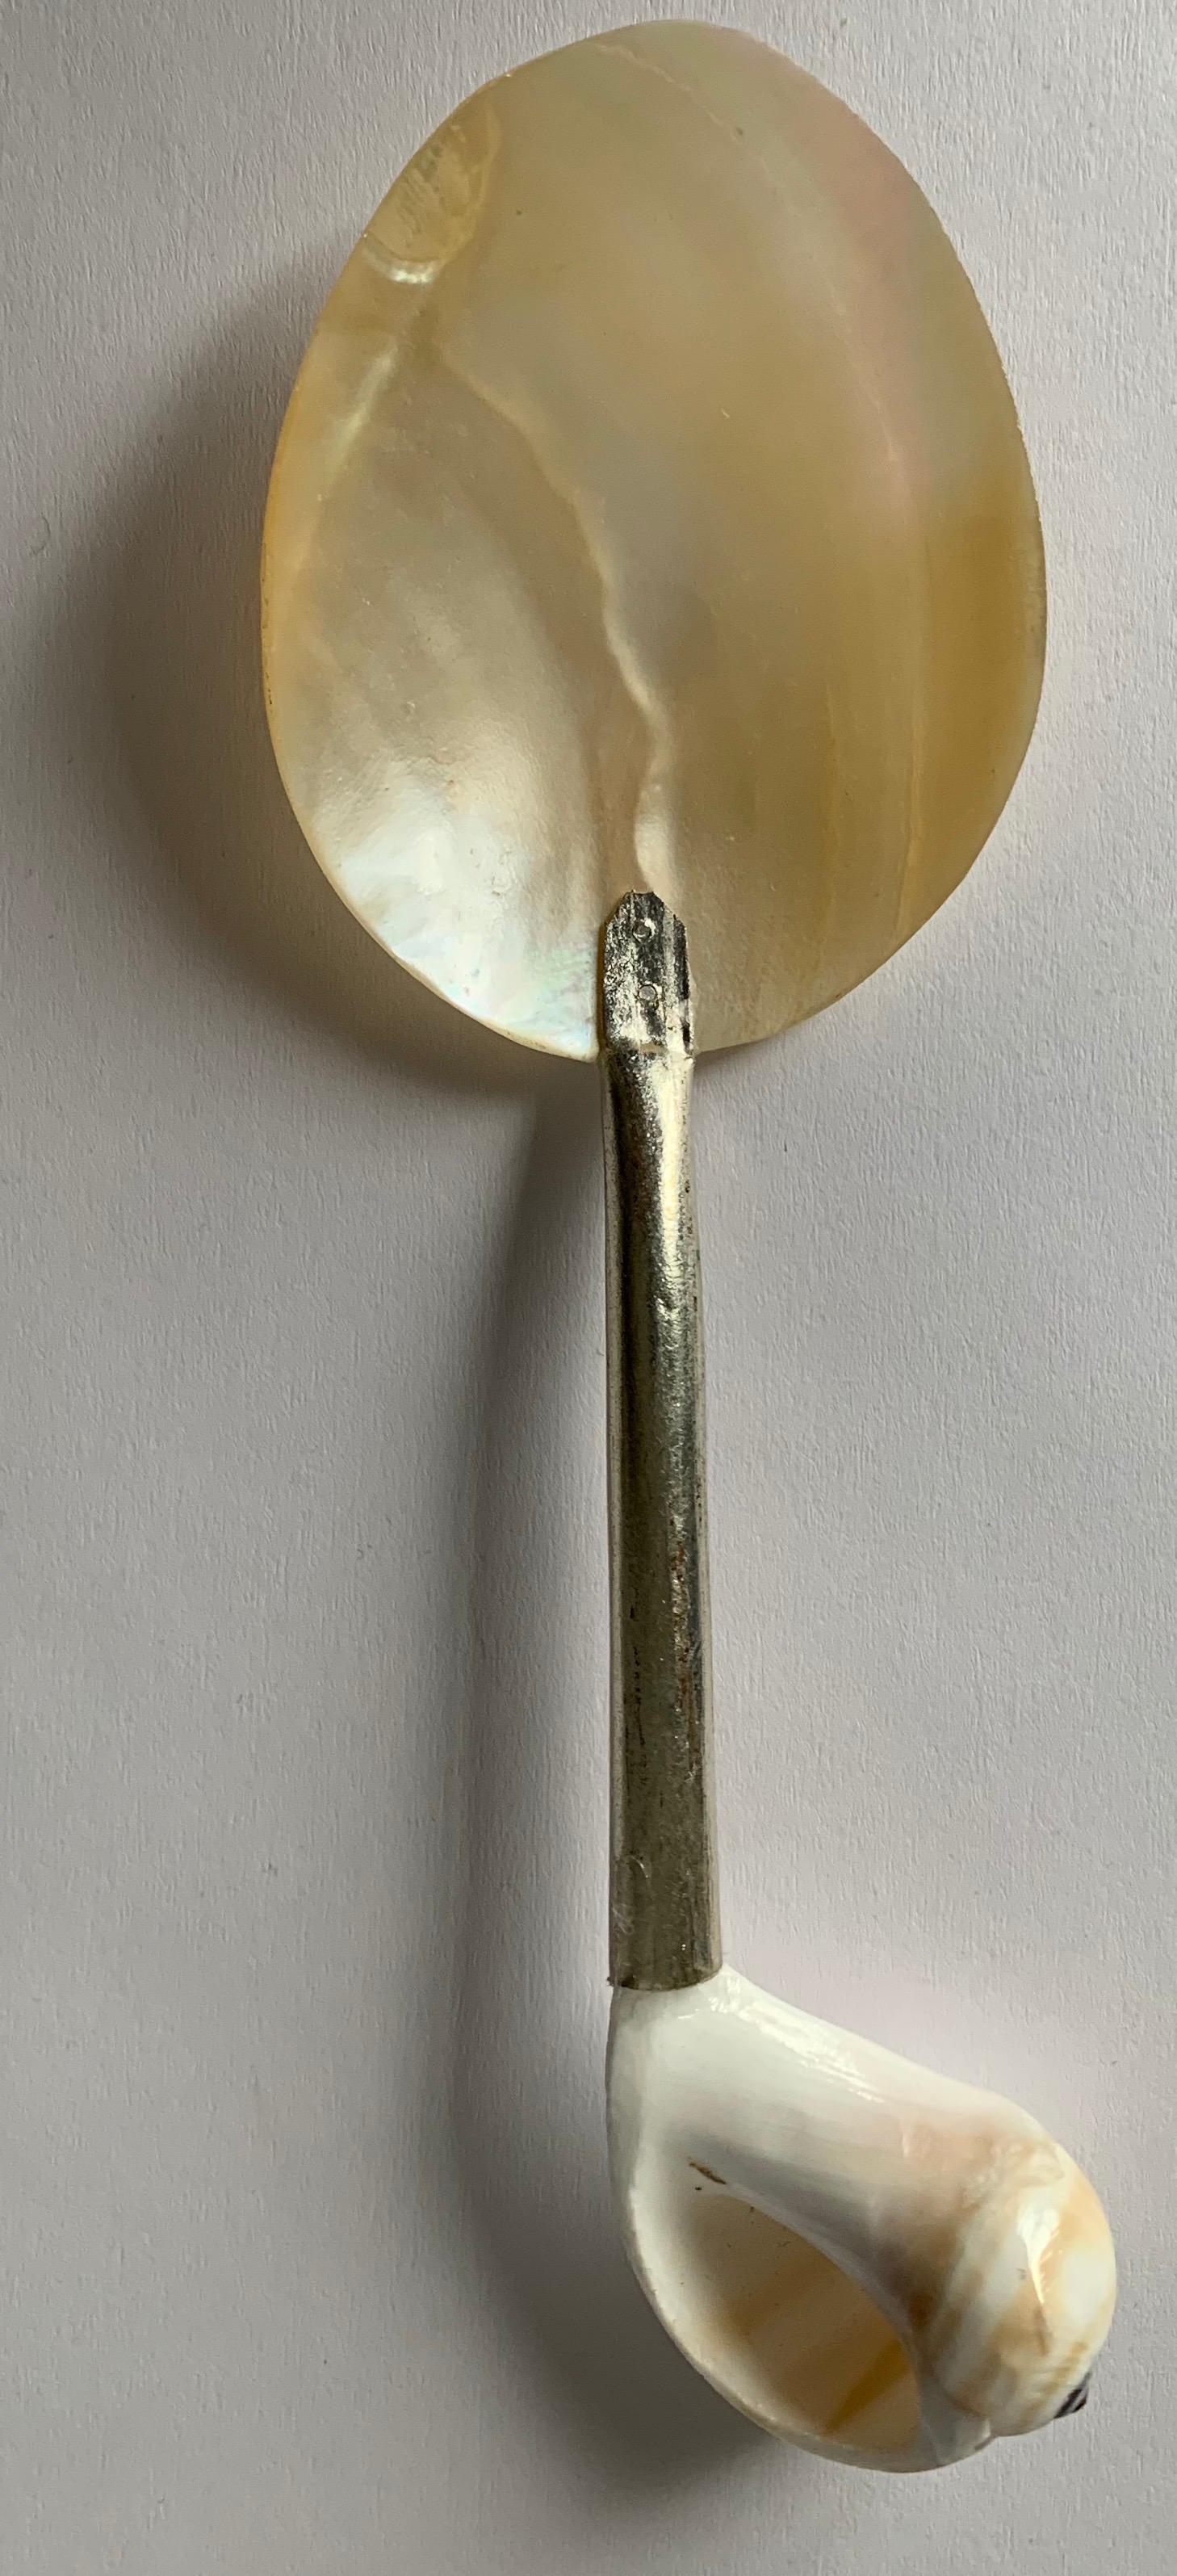 Set of 4 Victorian mother of pearl spoons. Each has a mother of pearl bowls with shell, metal and wood handles. No makers mark or signature.